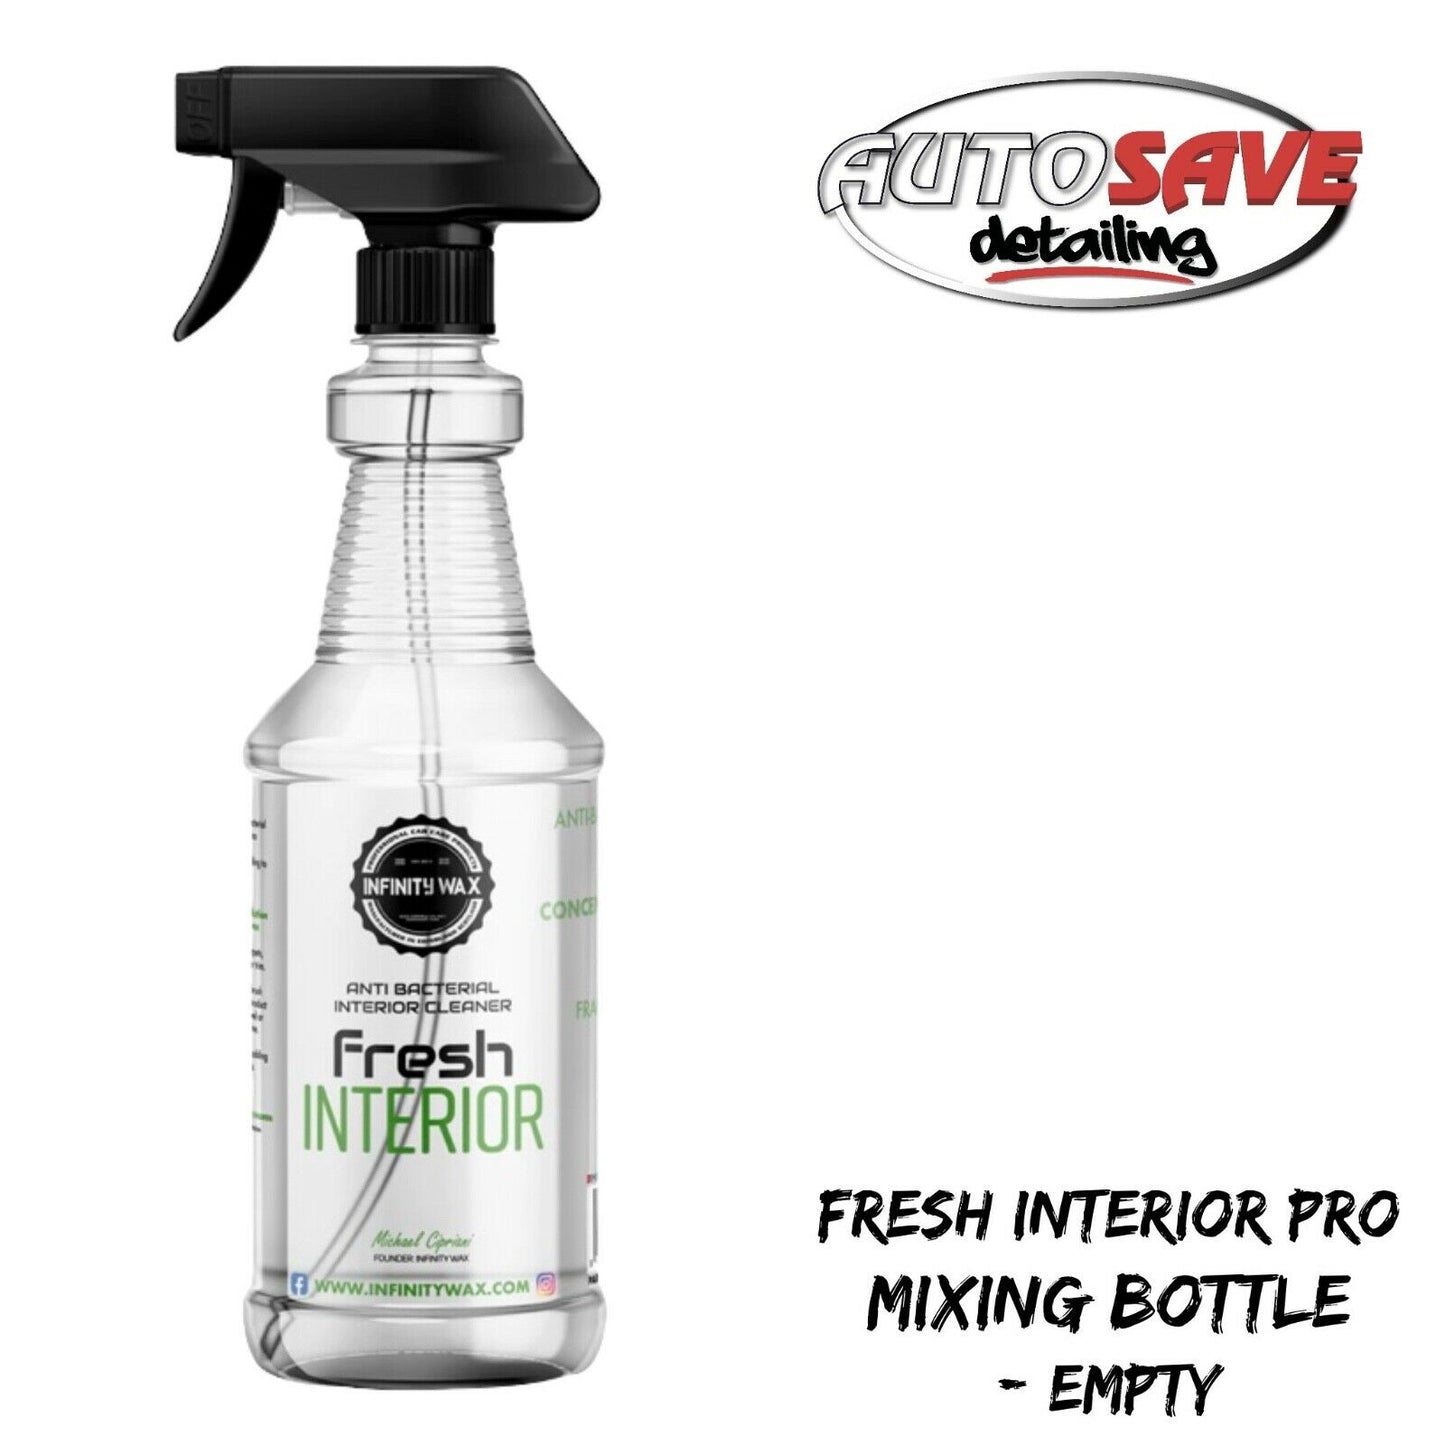 Infinity Wax Pro Bottle With label - Fresh Interior